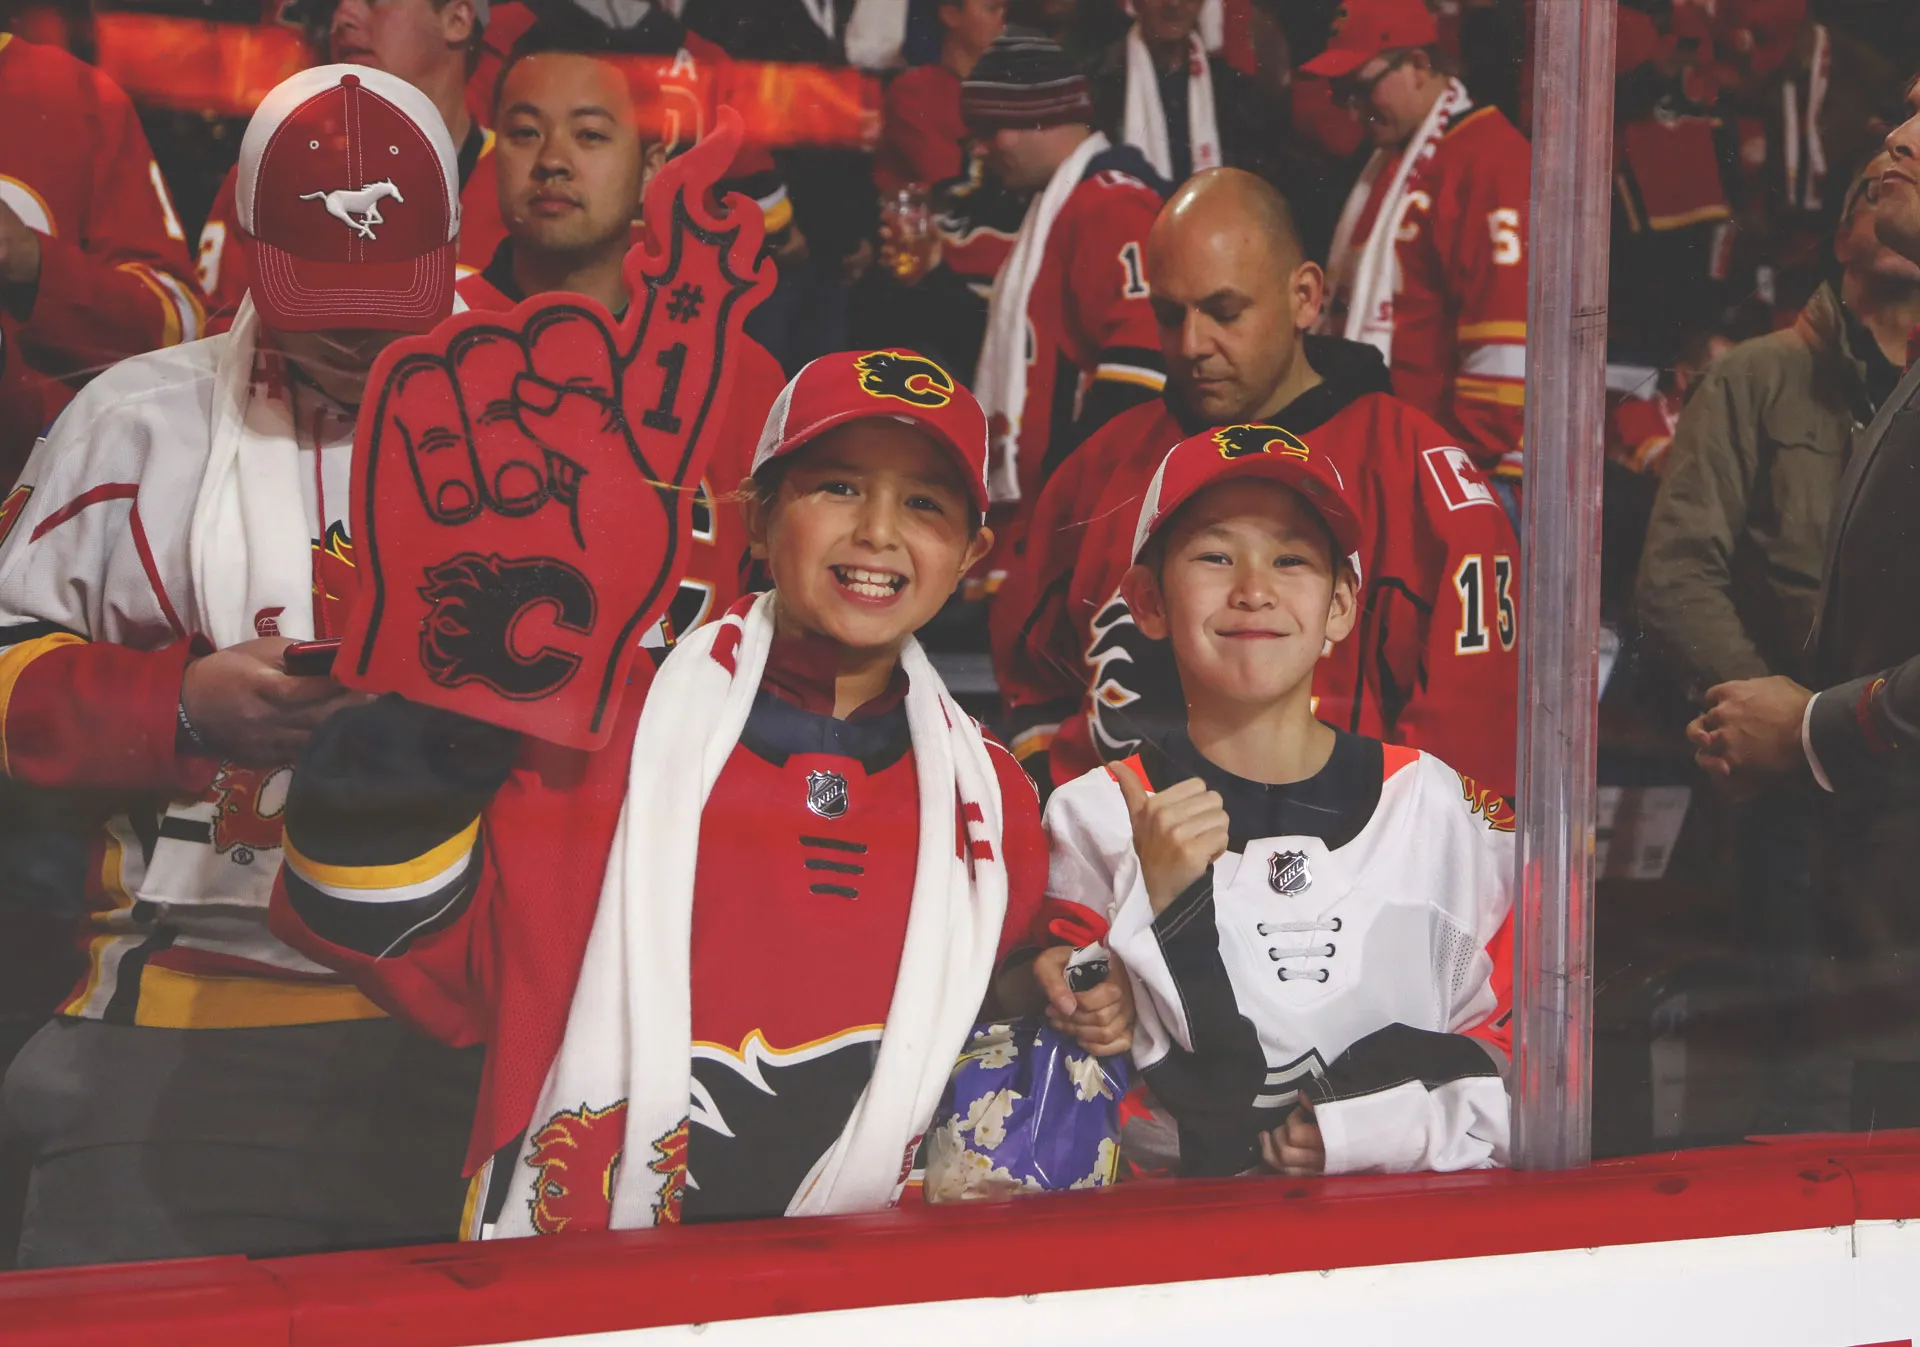 Family cheering near the glass at the Calgary Flames game at the Scotiabank Saddledome 